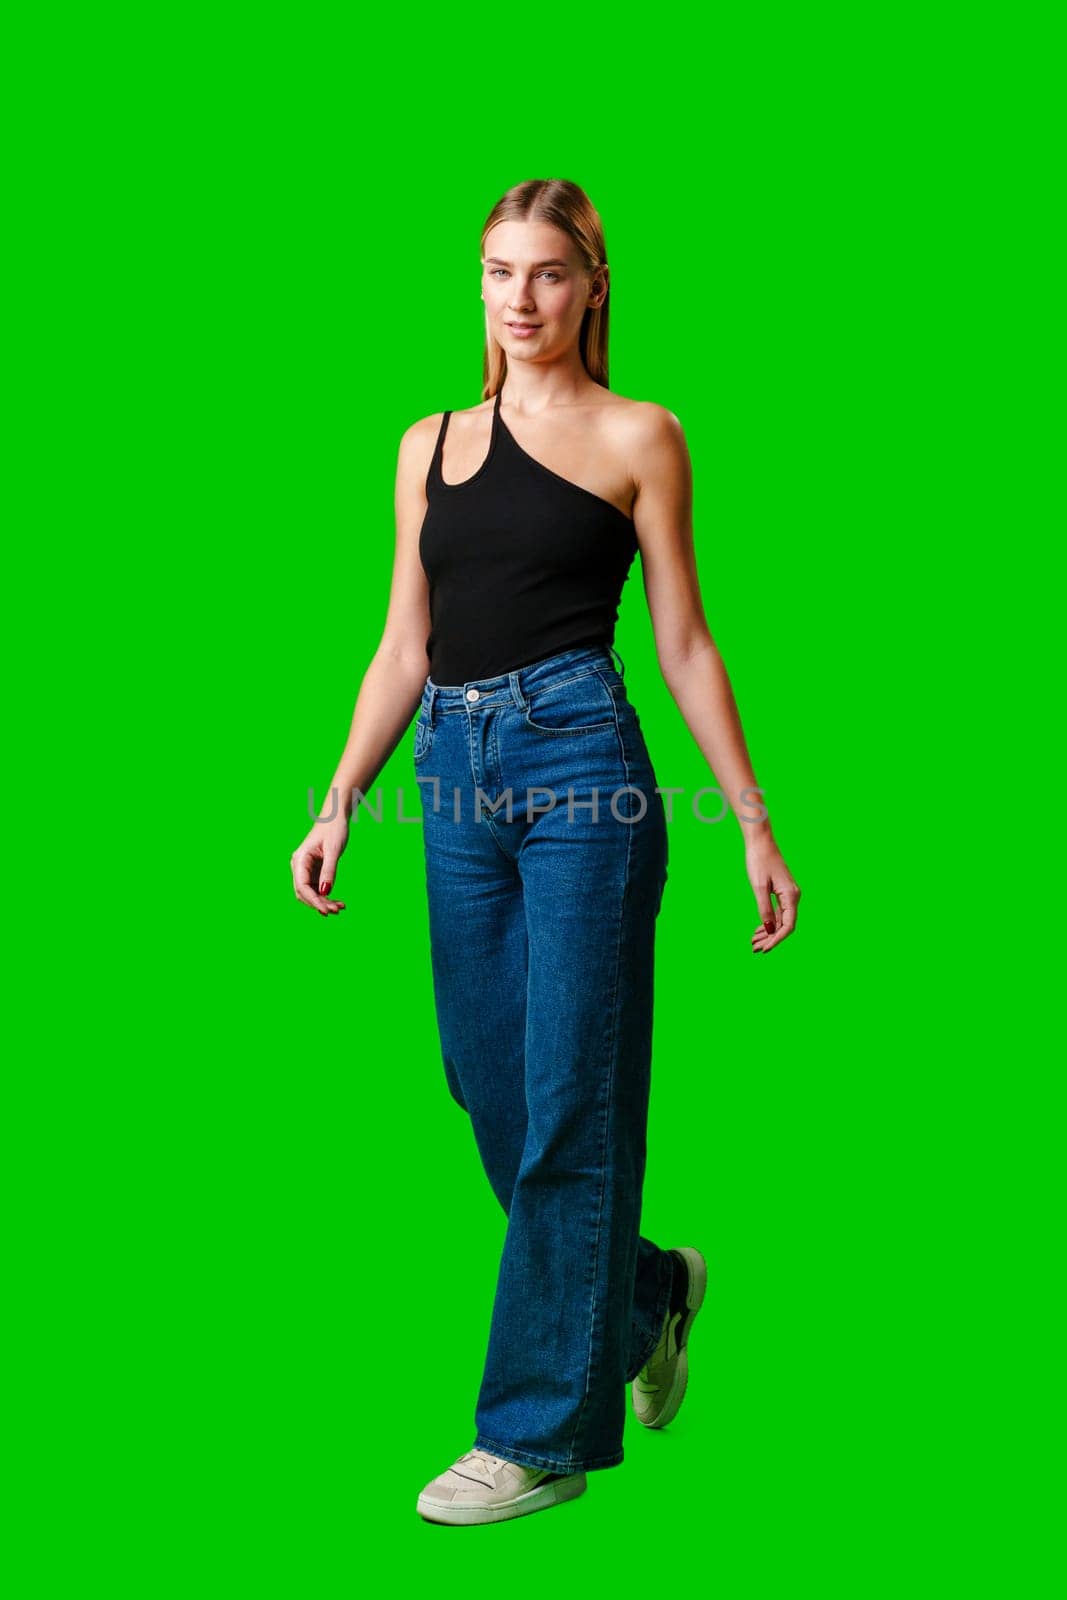 Blonde Woman in Black Tank Top Posing for Picture by Fabrikasimf